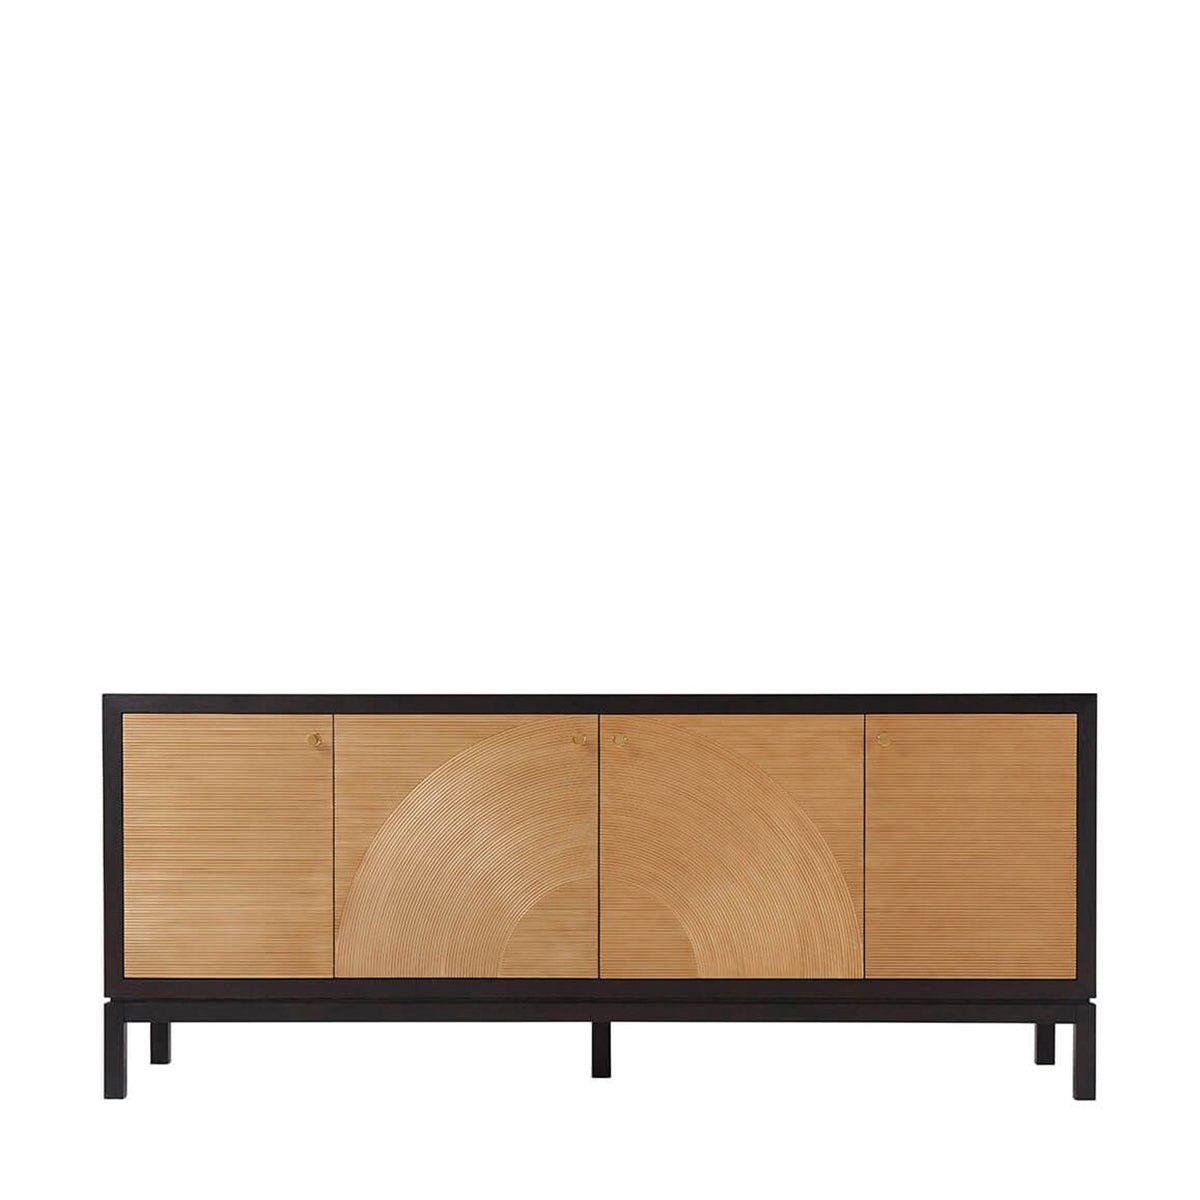 theodore alexander reed buffet sideboards & buffets 